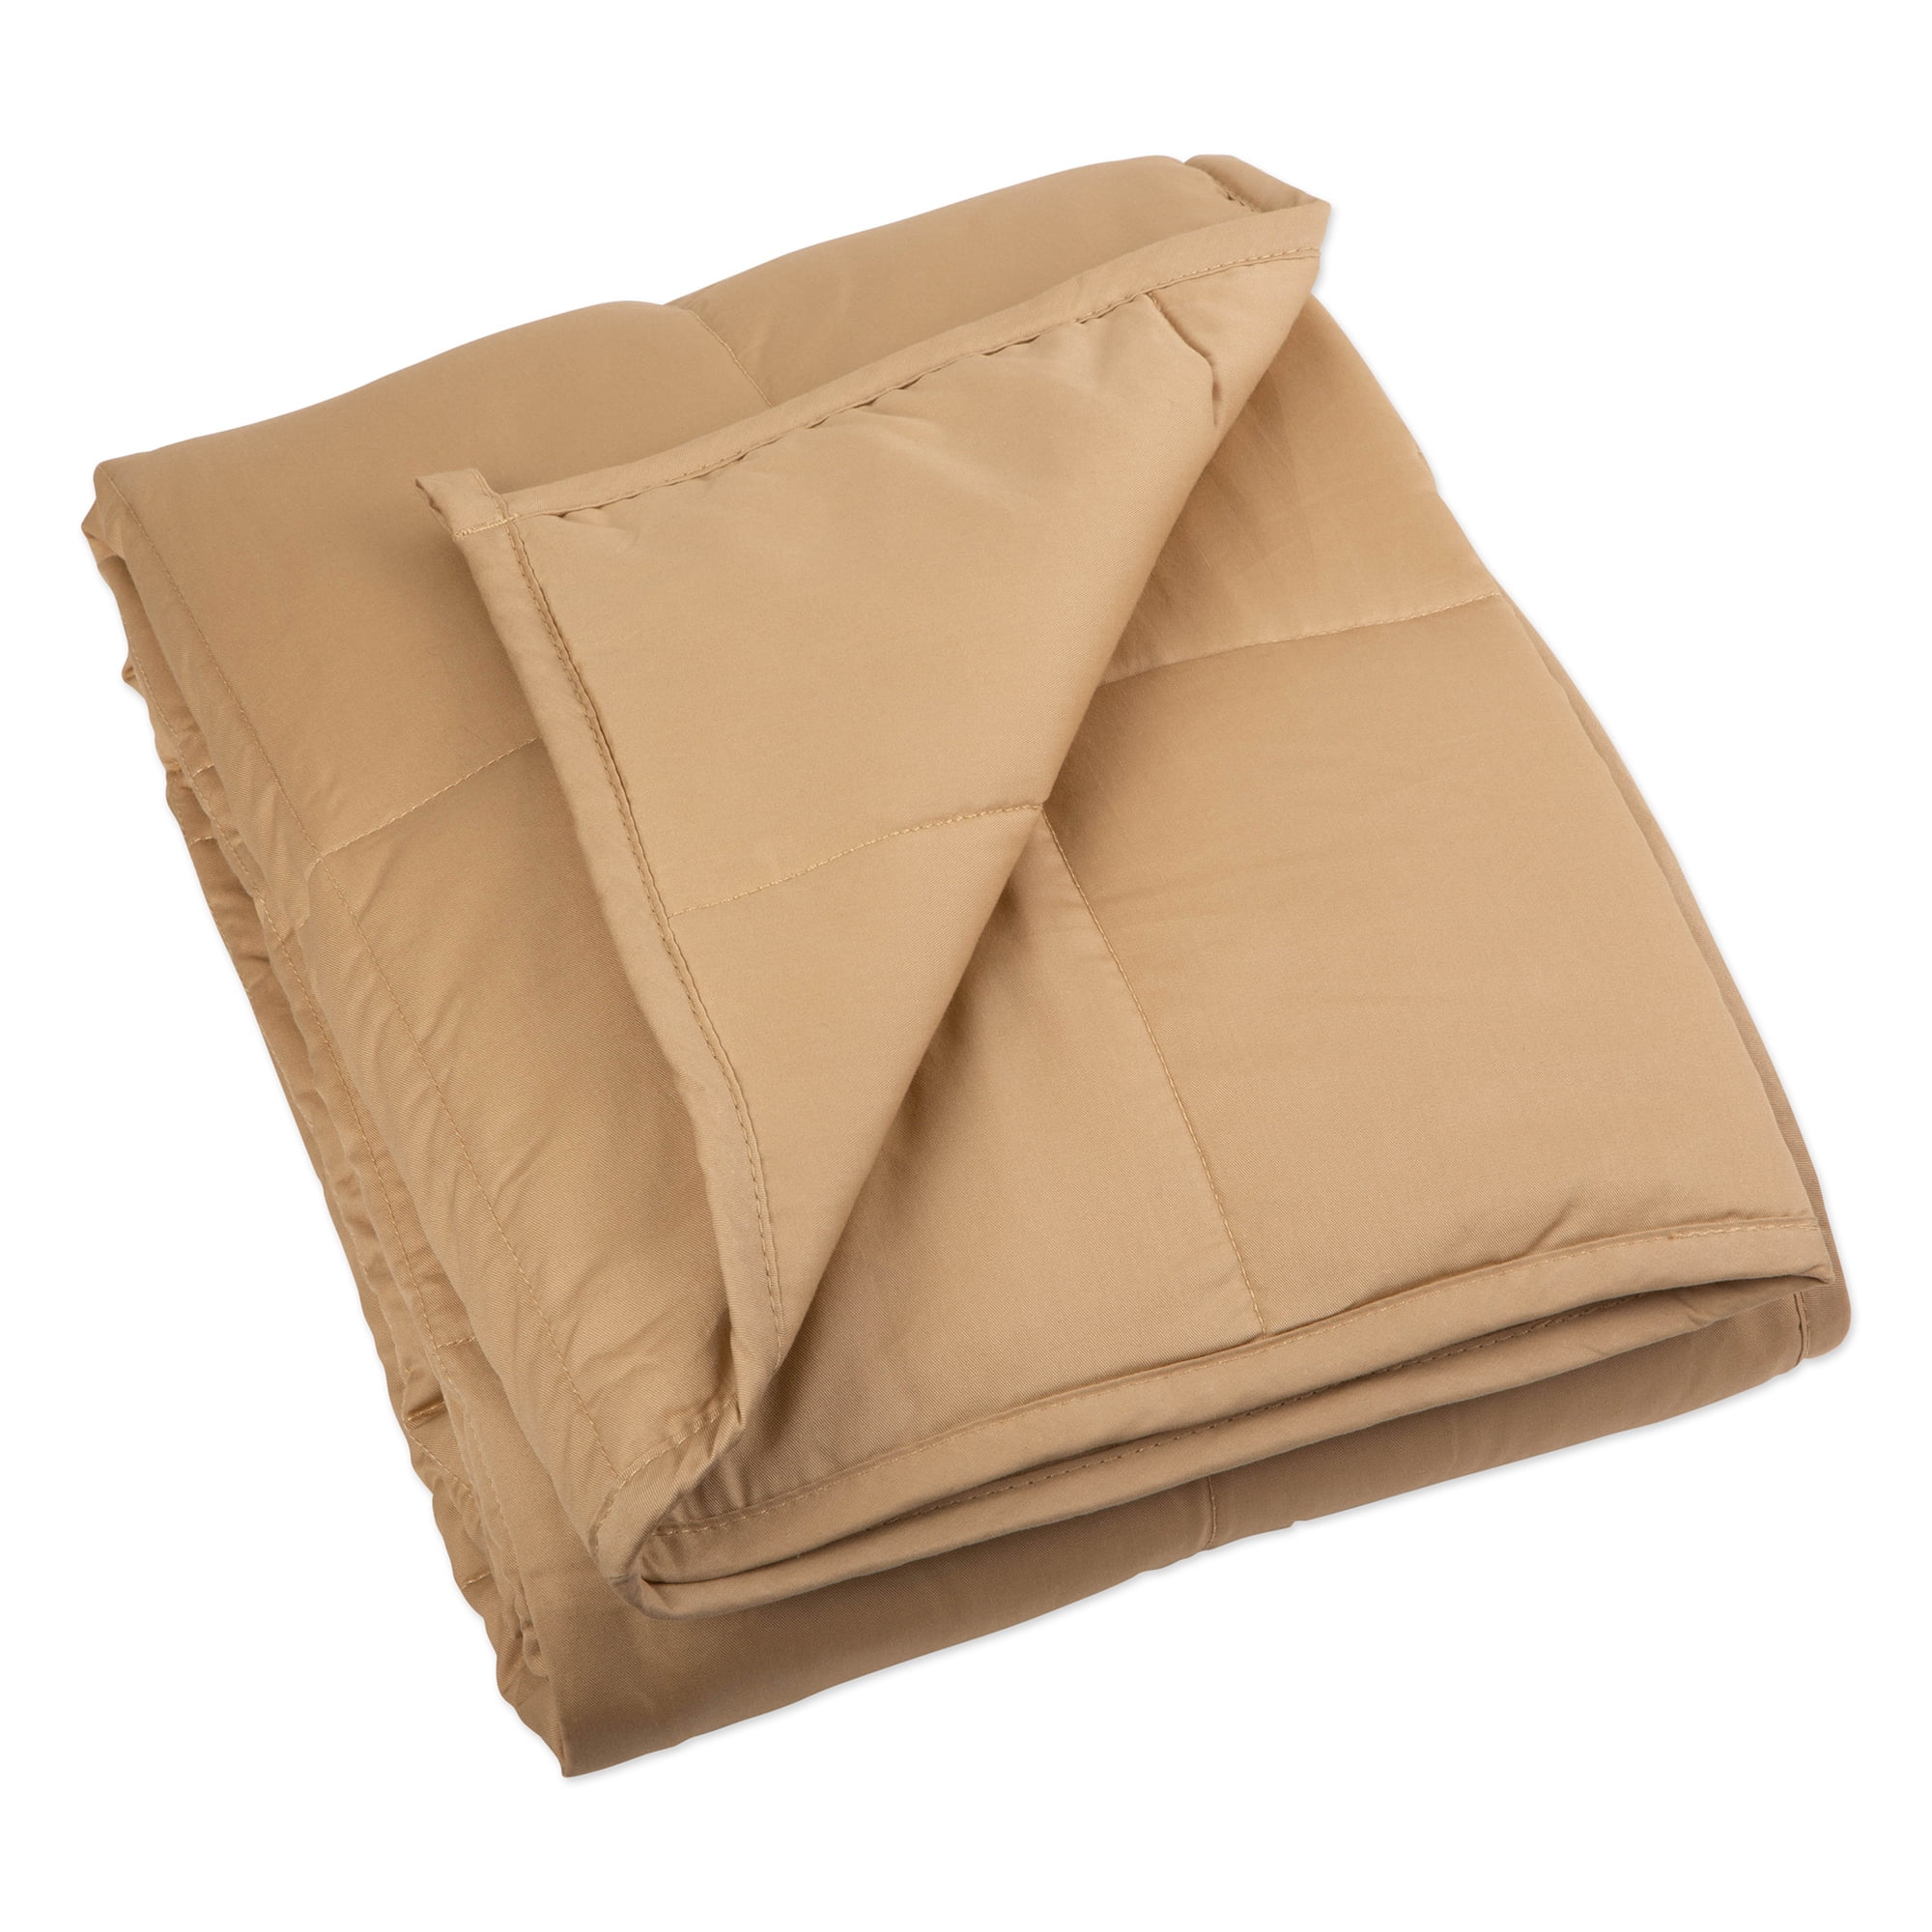 Z02292 20 Lbs Weighted Blanket, Taupe - 60 X 80 In.